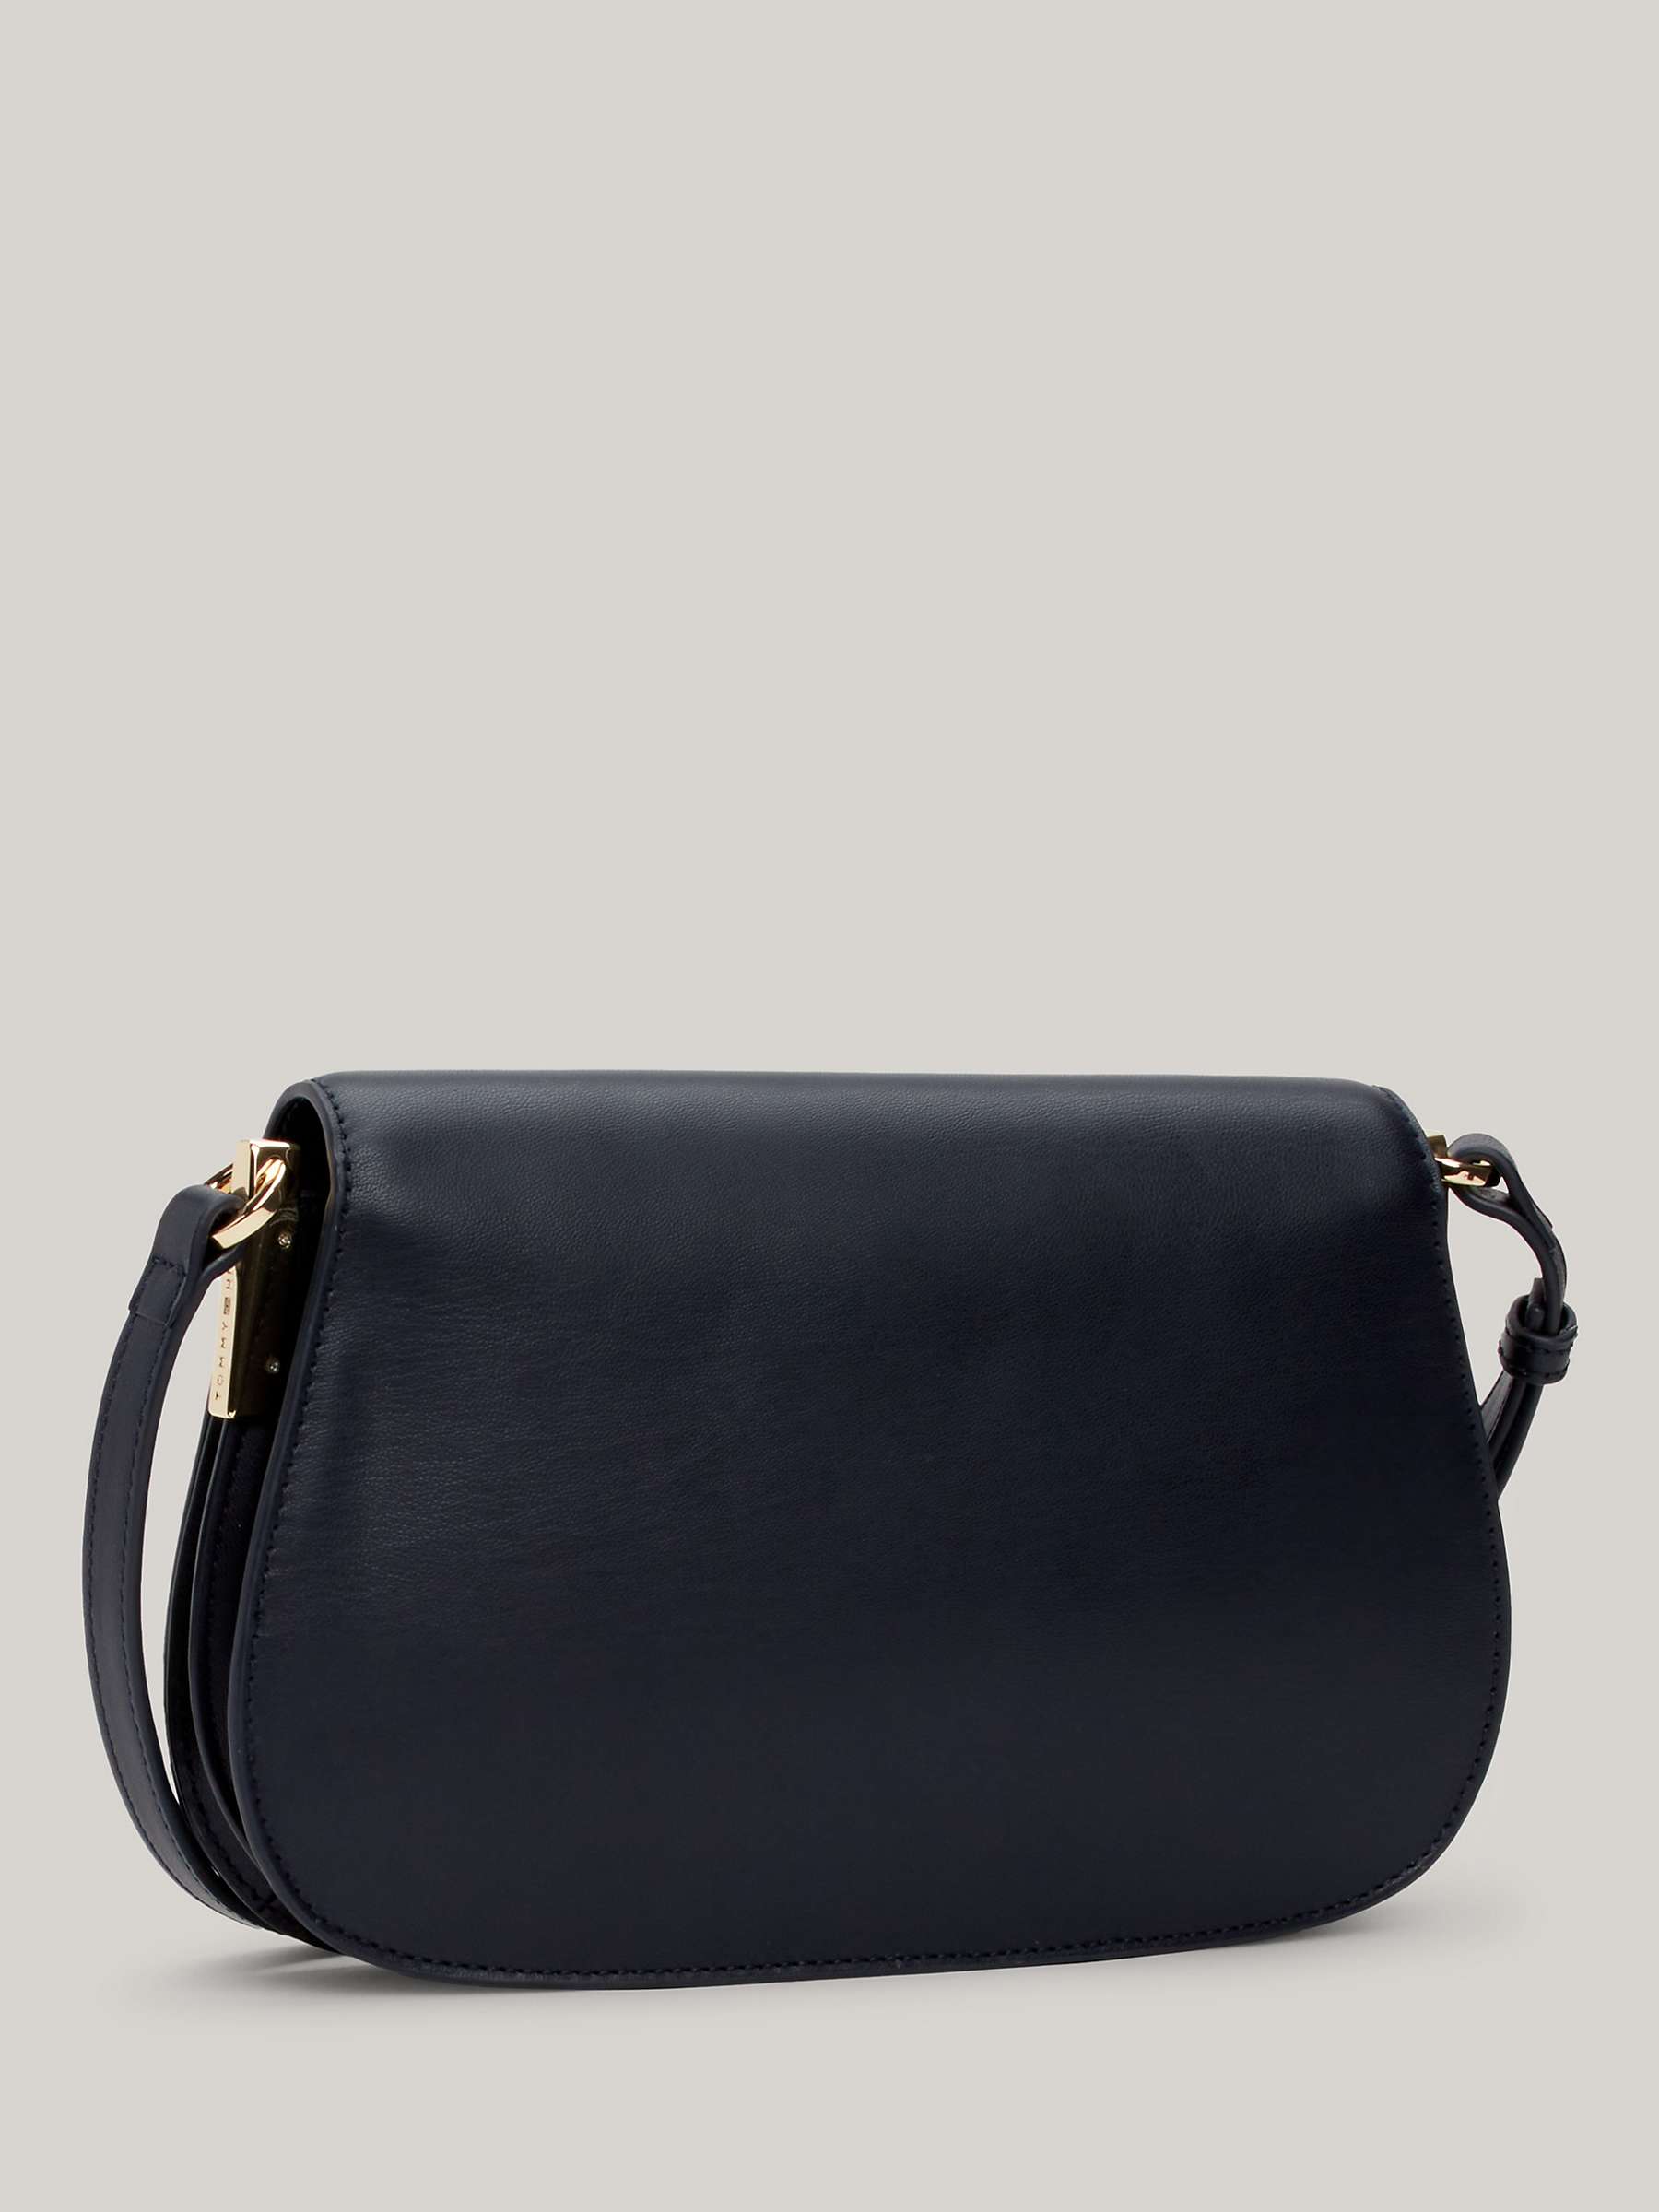 Buy Tommy Hilfiger Spring Chic Flapover Crossbody Bag, Space Blue Online at johnlewis.com